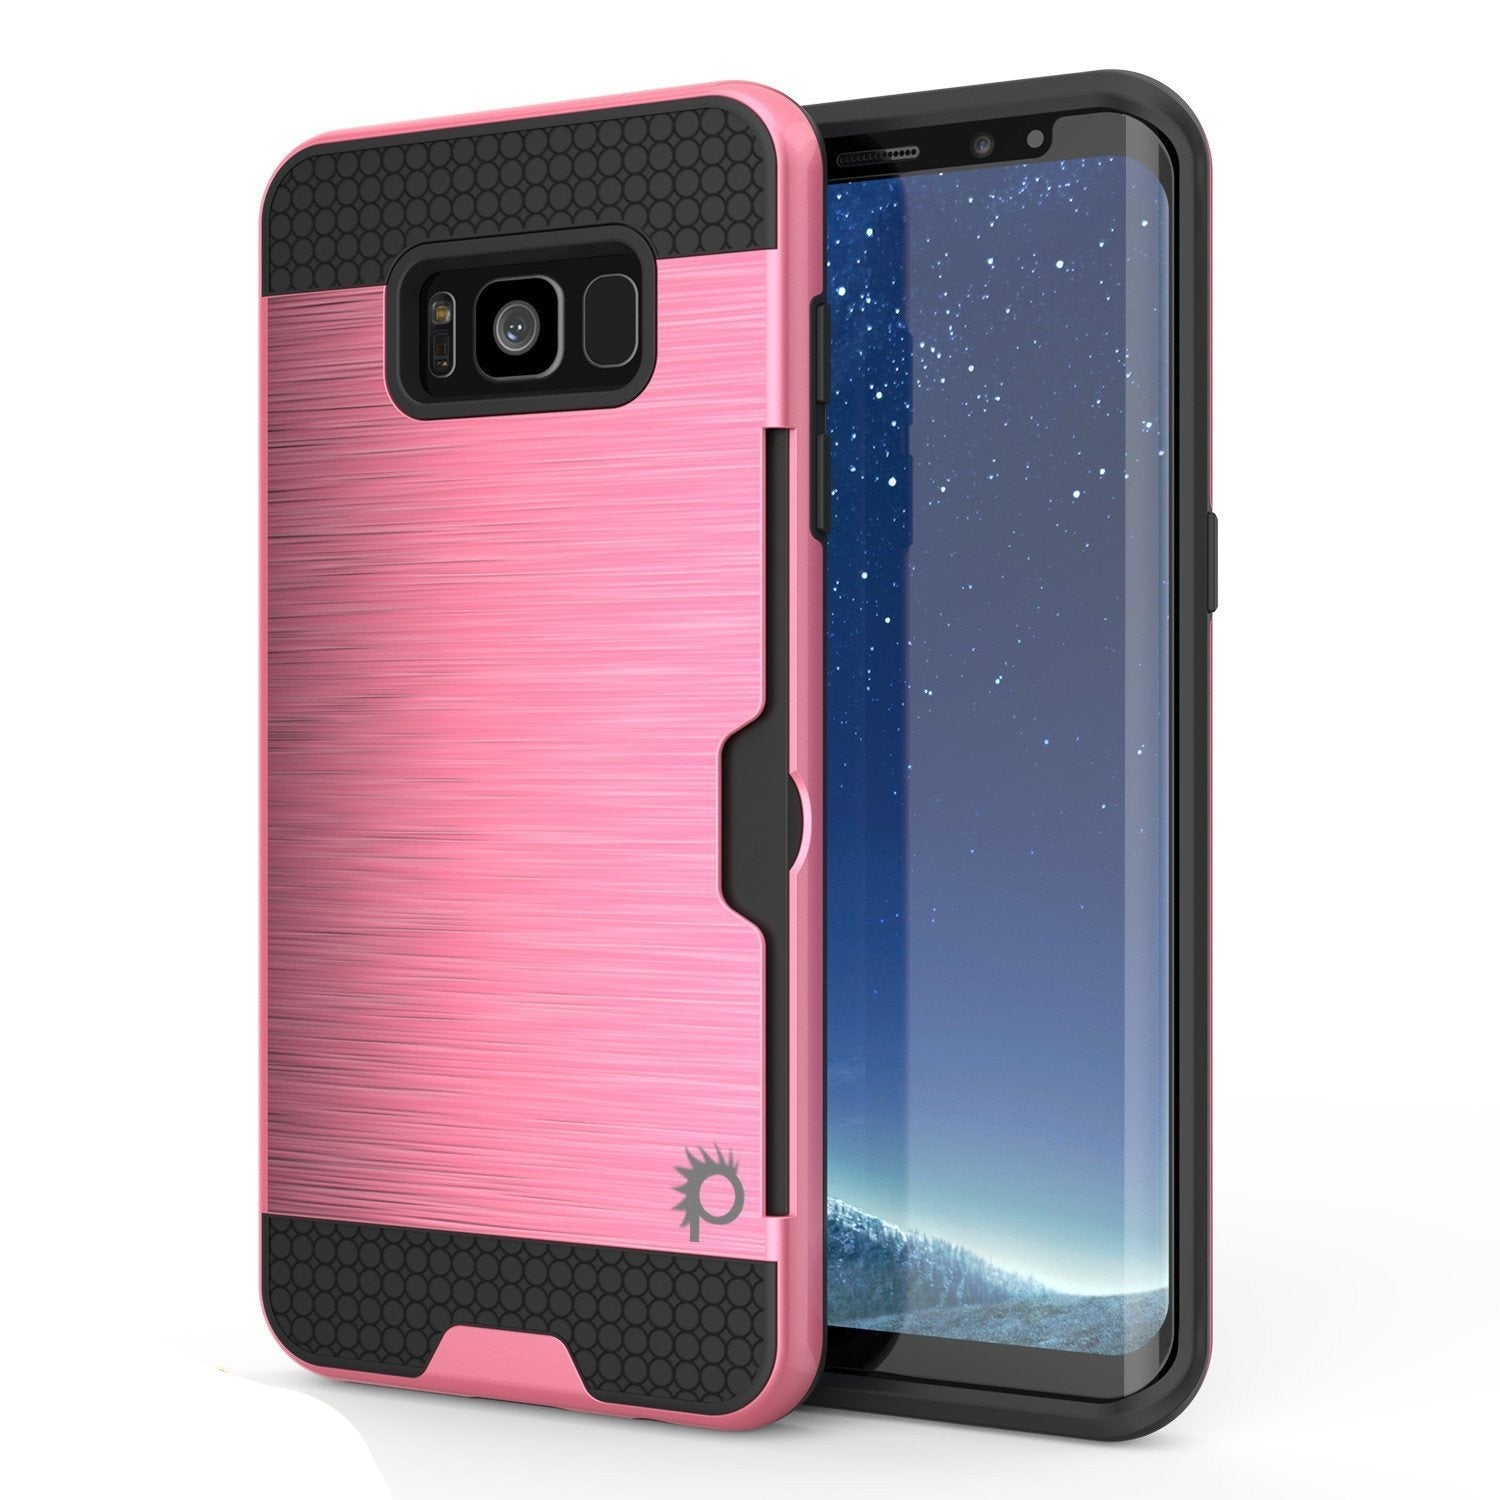 Galaxy S8 Case, PUNKcase [SLOT Series] [Slim Fit] Dual-Layer Armor Cover w/Integrated Anti-Shock System, Credit Card Slot & PUNKSHIELD Screen Protector for Samsung Galaxy S8 [Pink] - PunkCase NZ